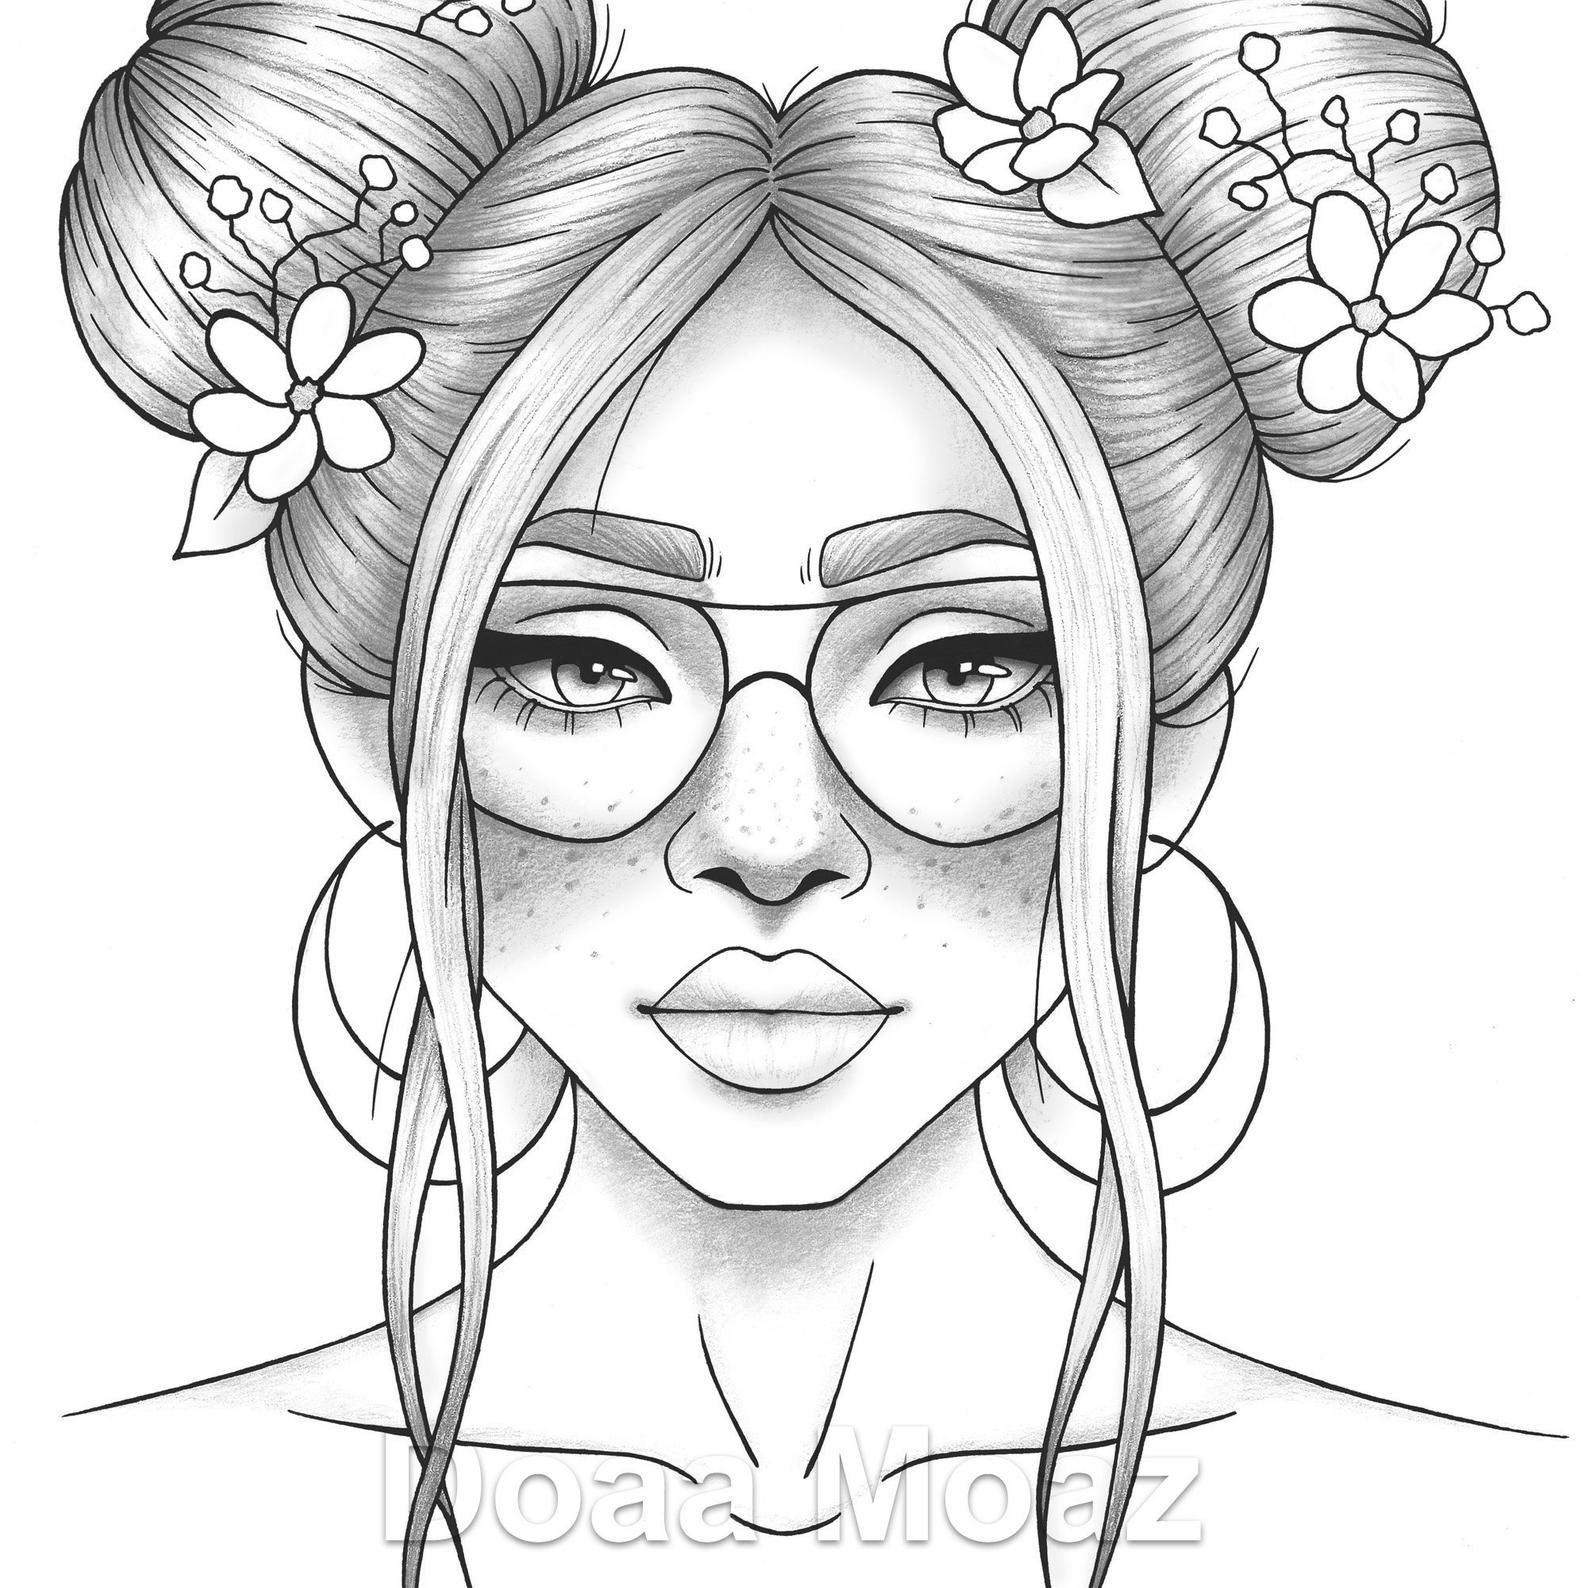 Printable coloring page girl portrait and clothes colouring | Etsy in 2020  | People coloring pages, Coloring pages for girls, Outline drawings